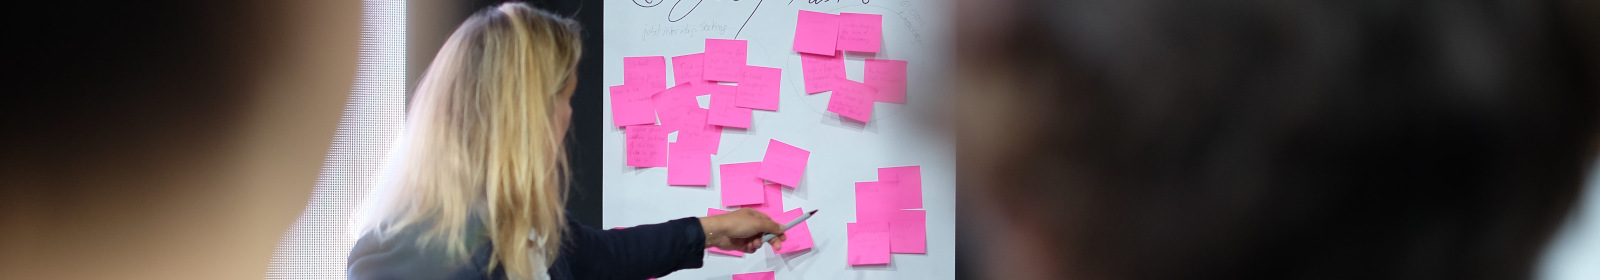 image of three people in front of a board of sticky notes